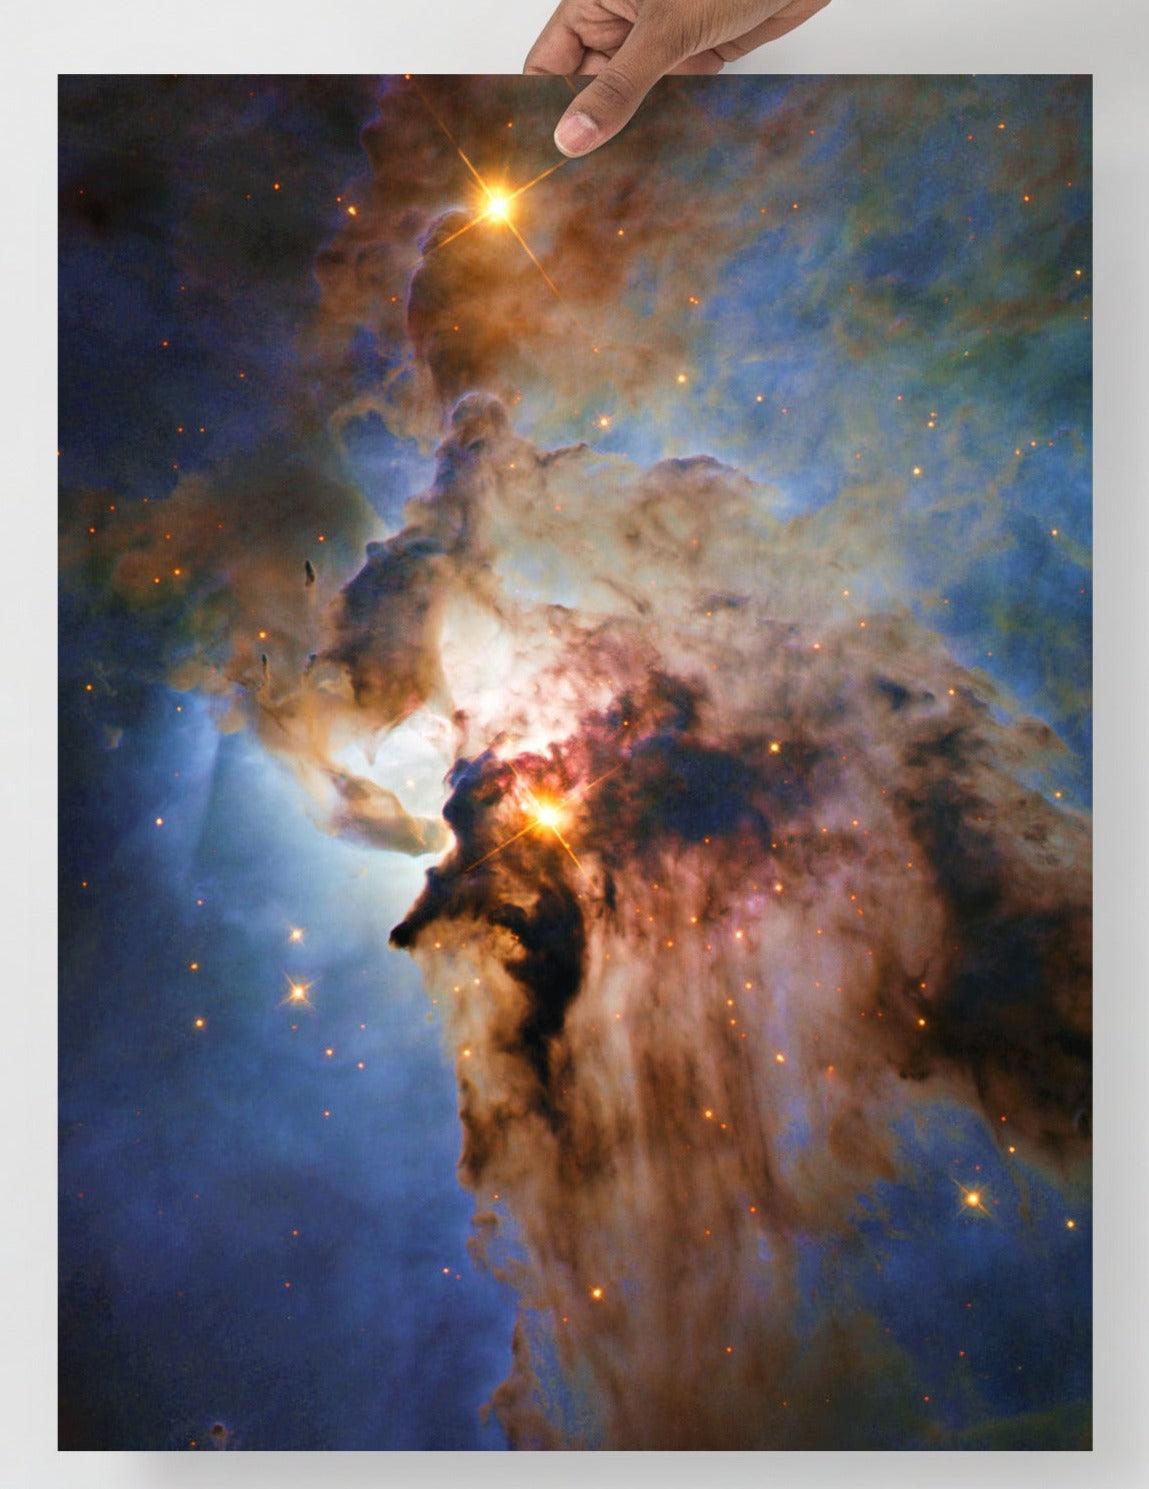 A Lagoon Nebula by Hubble Space Telescope poster on a plain backdrop in size 18x24”.